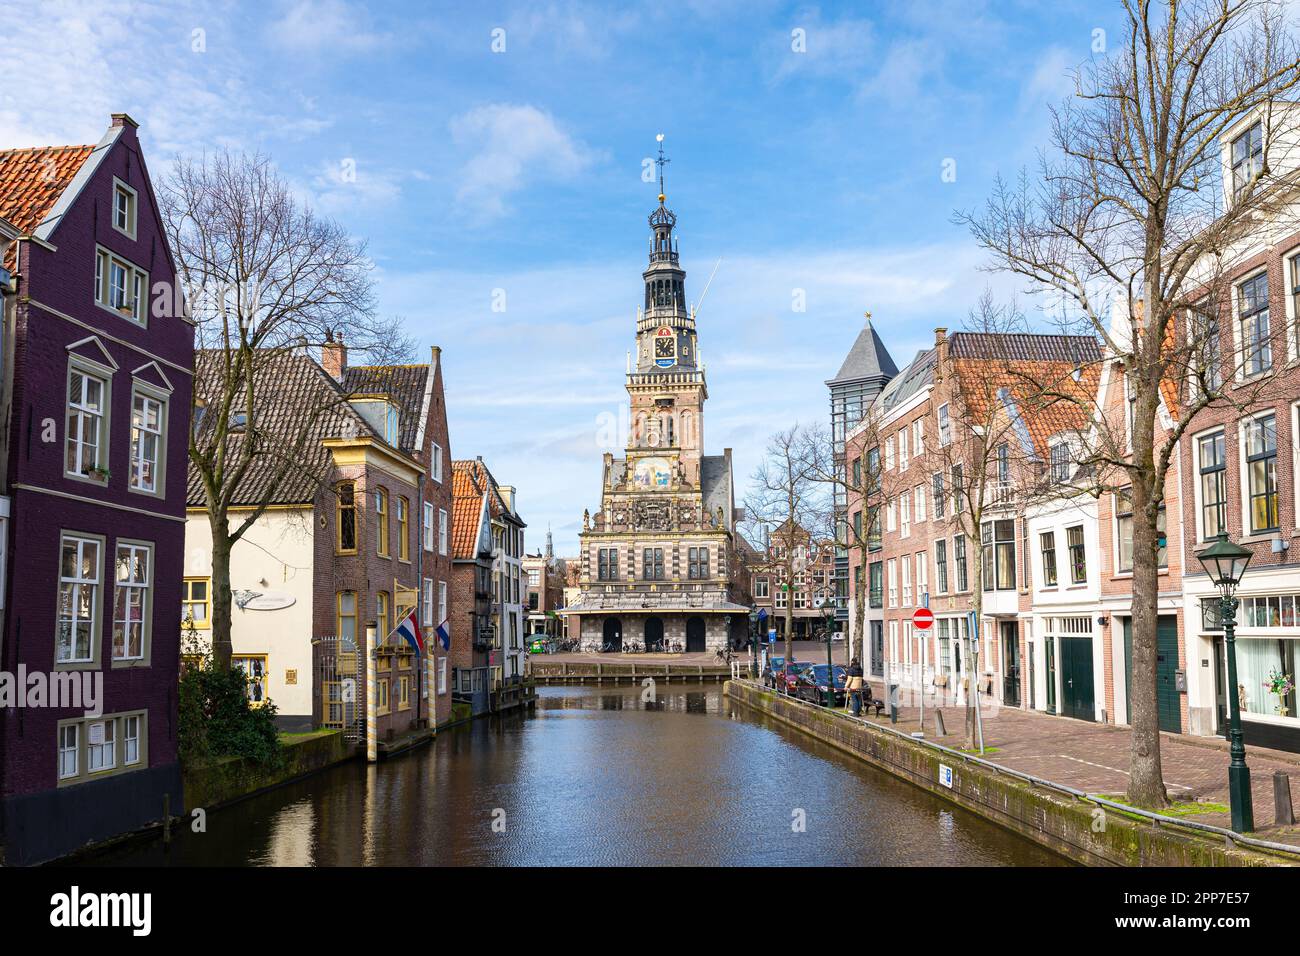 Canal leading to The Waag building on the Waagplein in the historic town of Alkmaar, Netherlands. Stock Photo